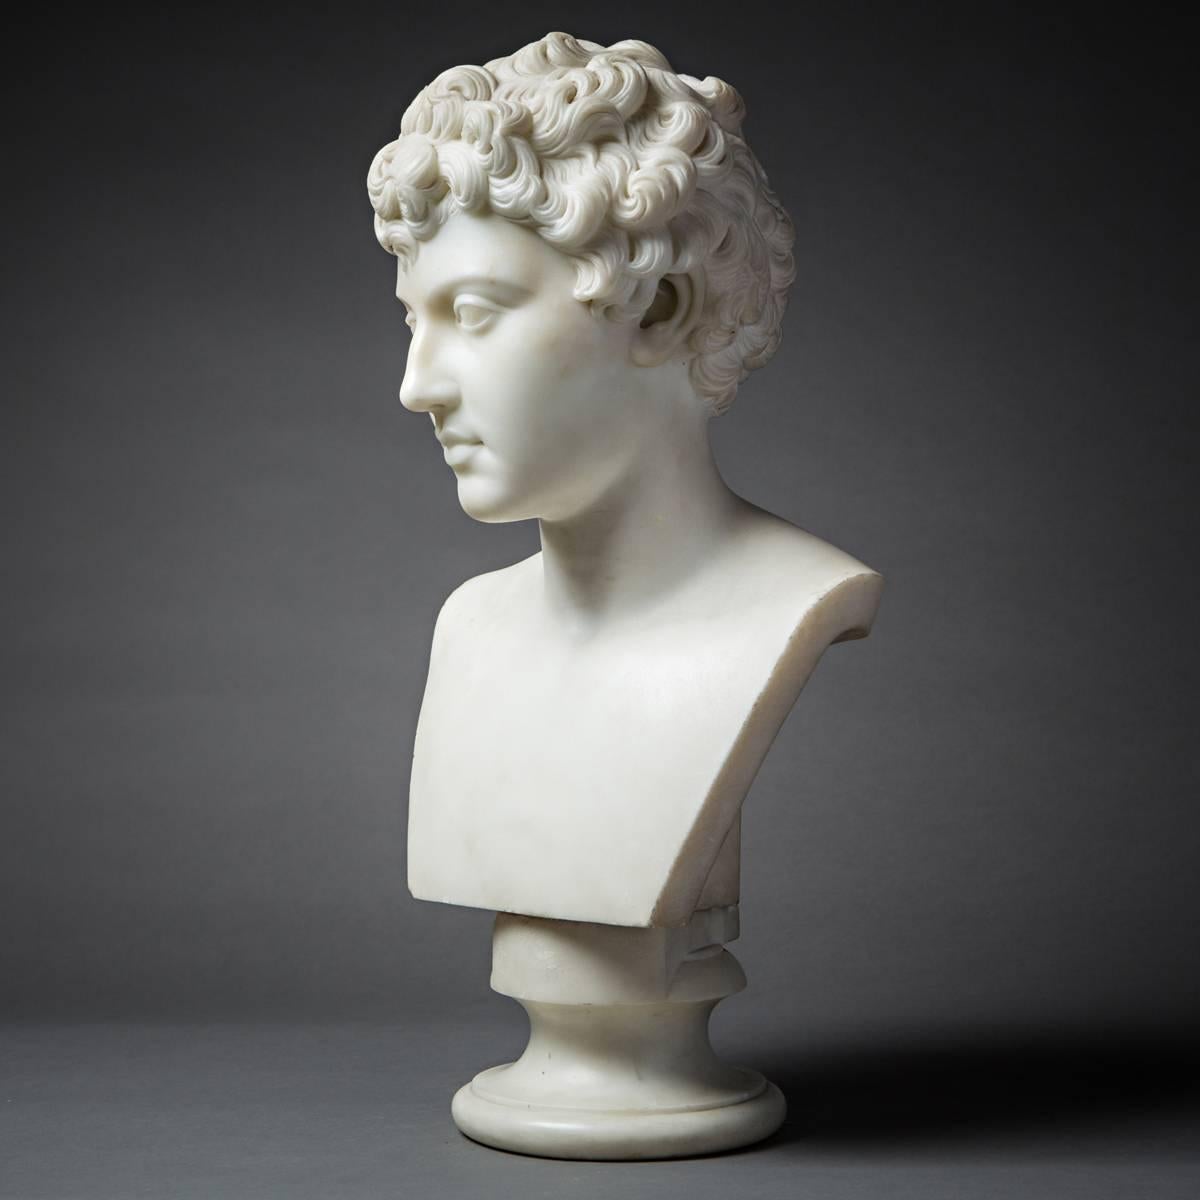 Neoclassical Classical Revival Marble Bust of a Young Marcus Aurelius For Sale